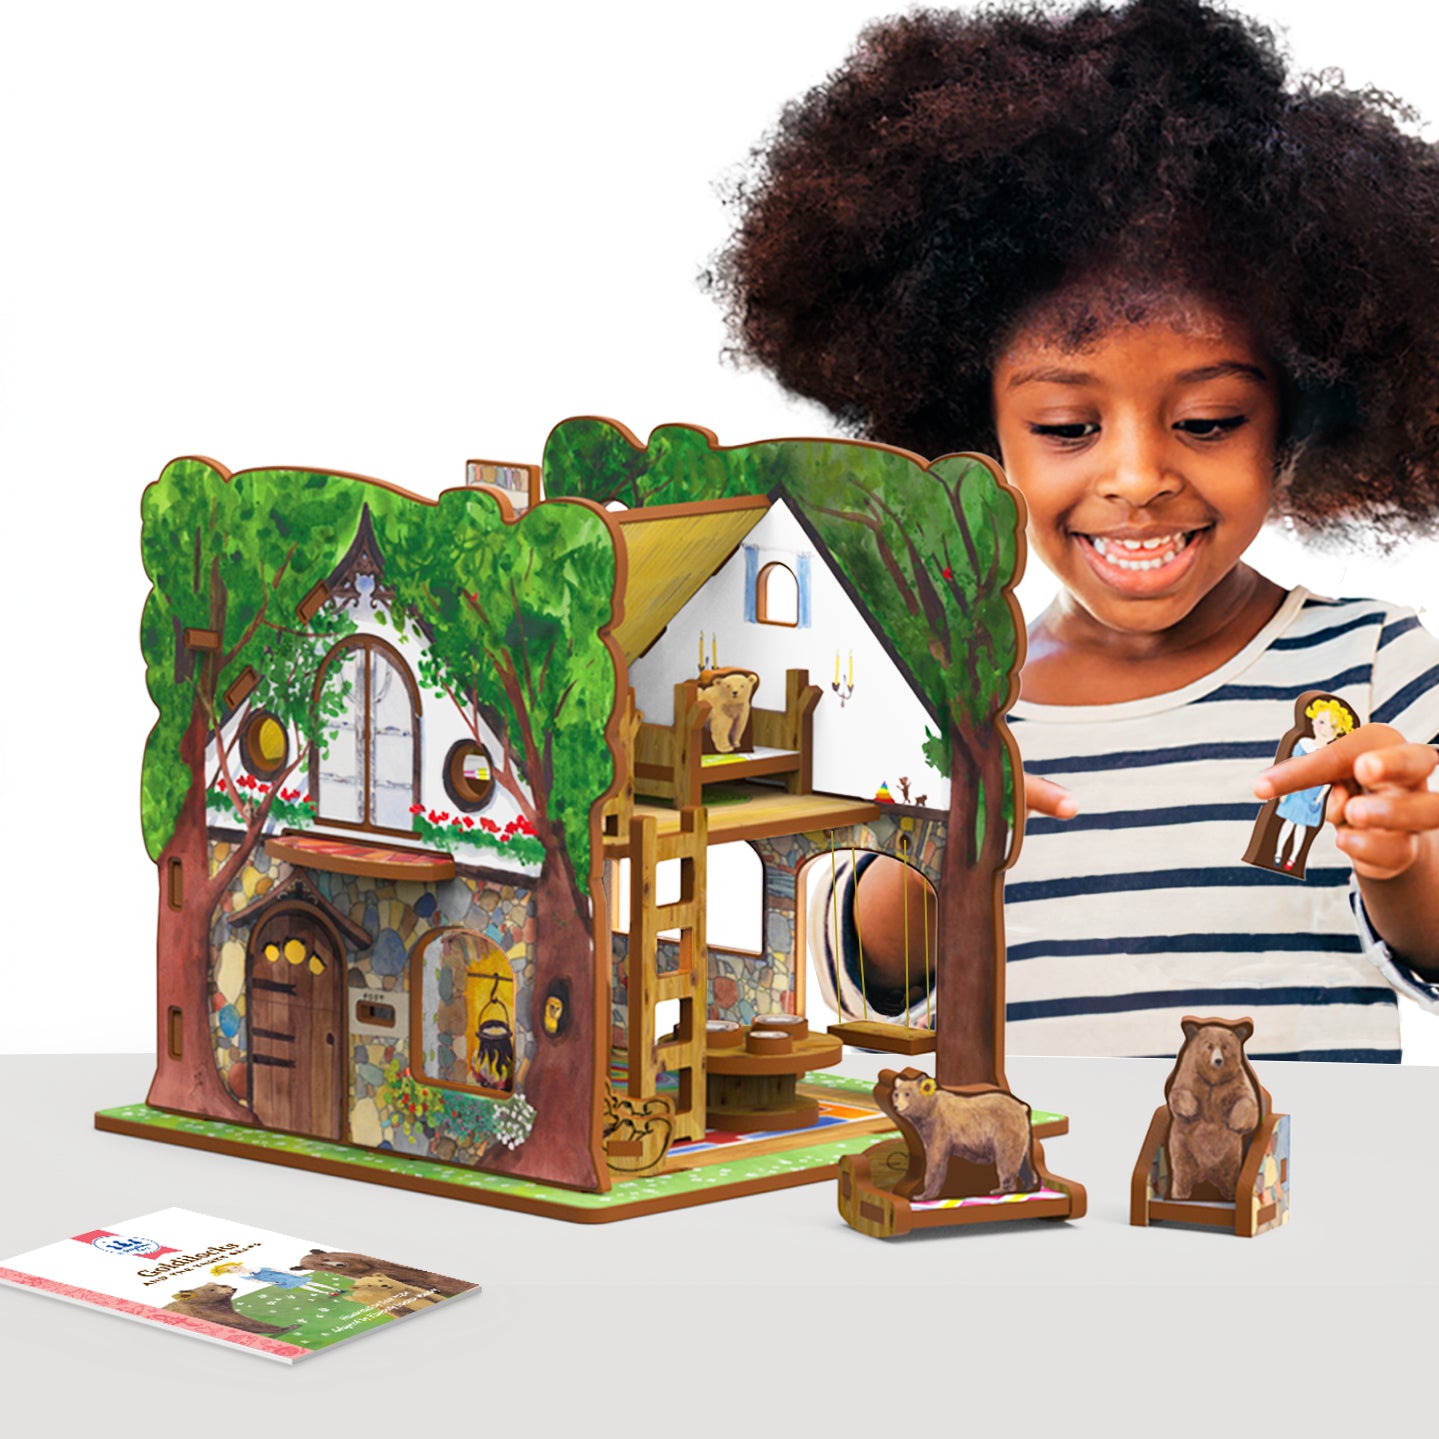 Storytime Toys | Bringing books to life as 3D Playsets